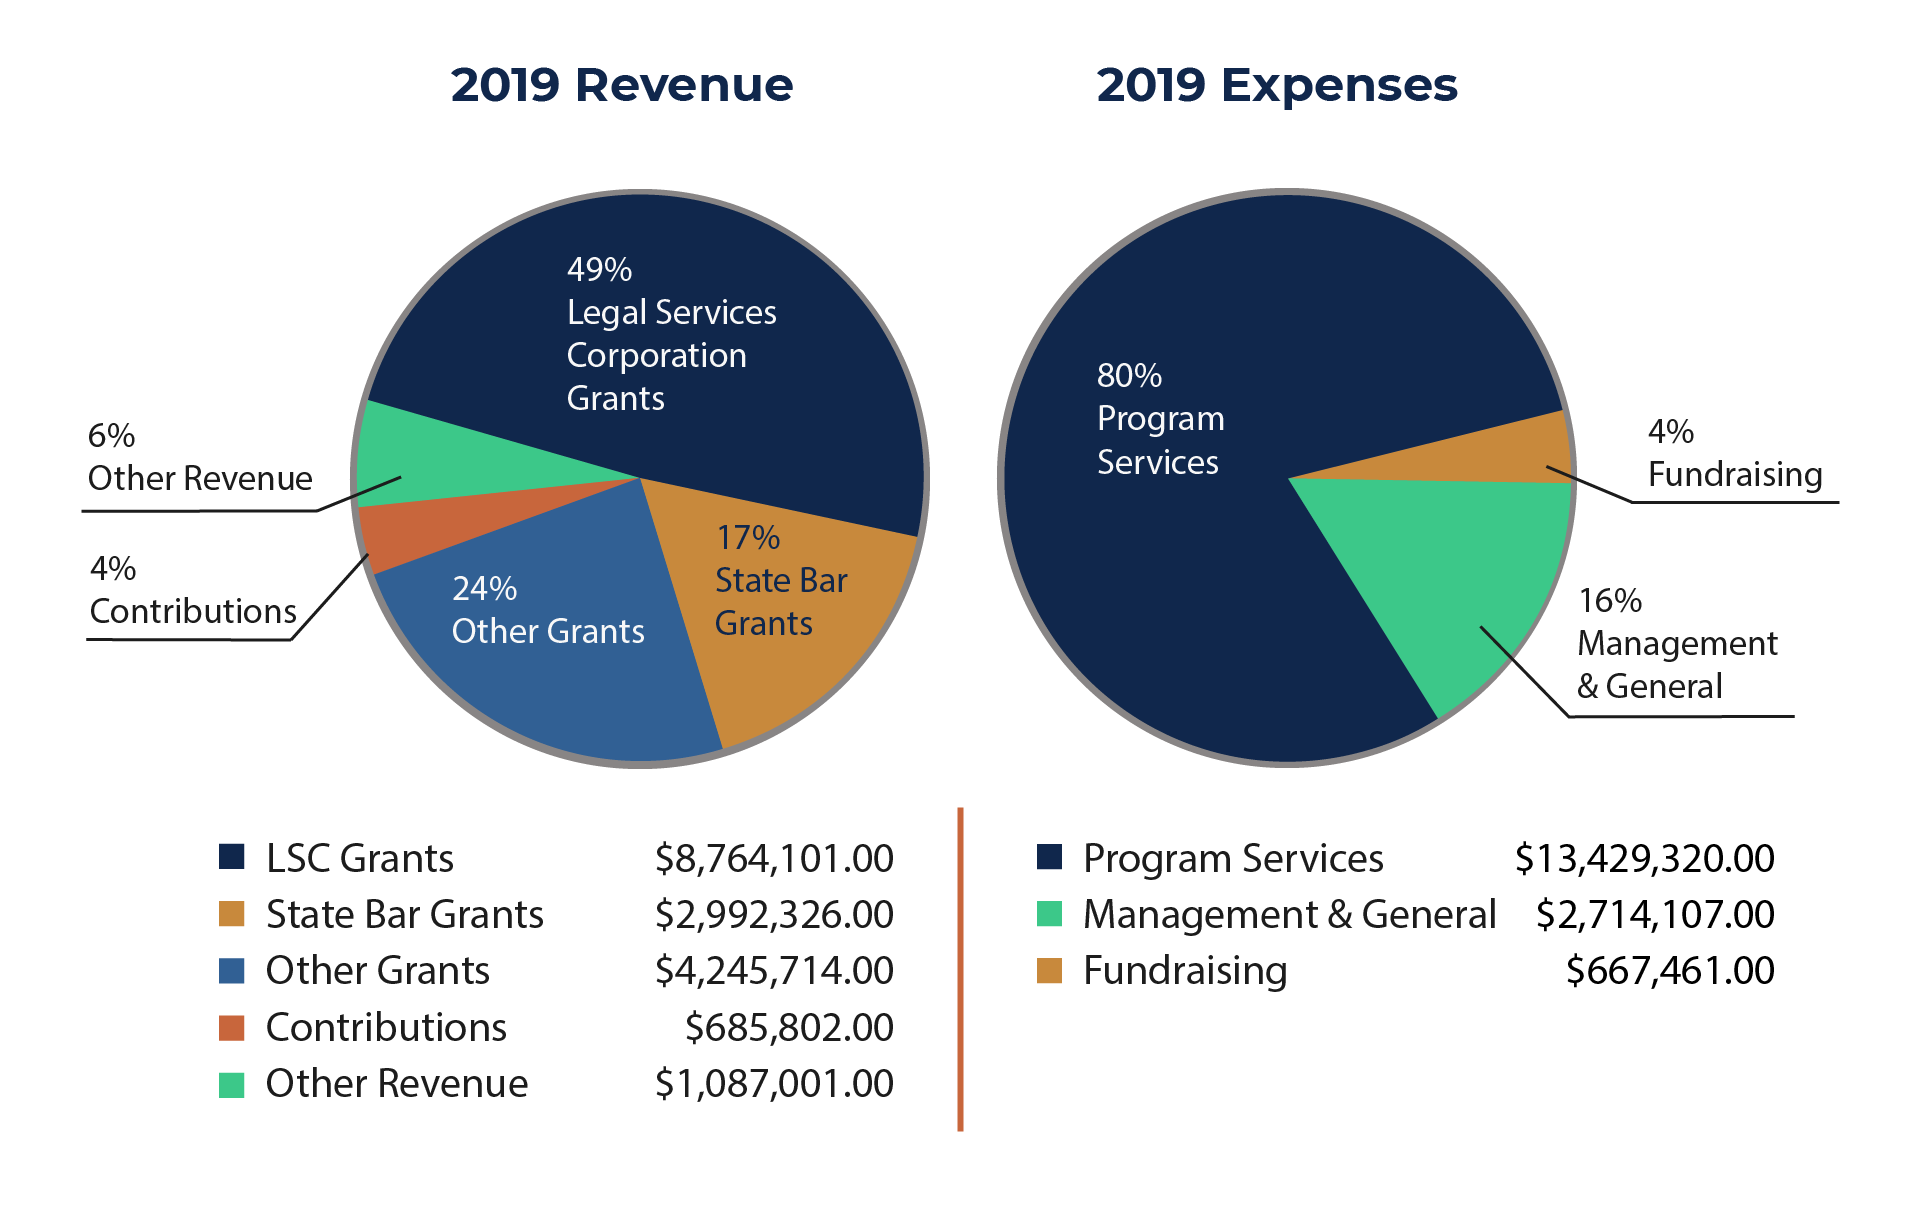 pie charts showing 2019 revenue and expenses categories by percentage